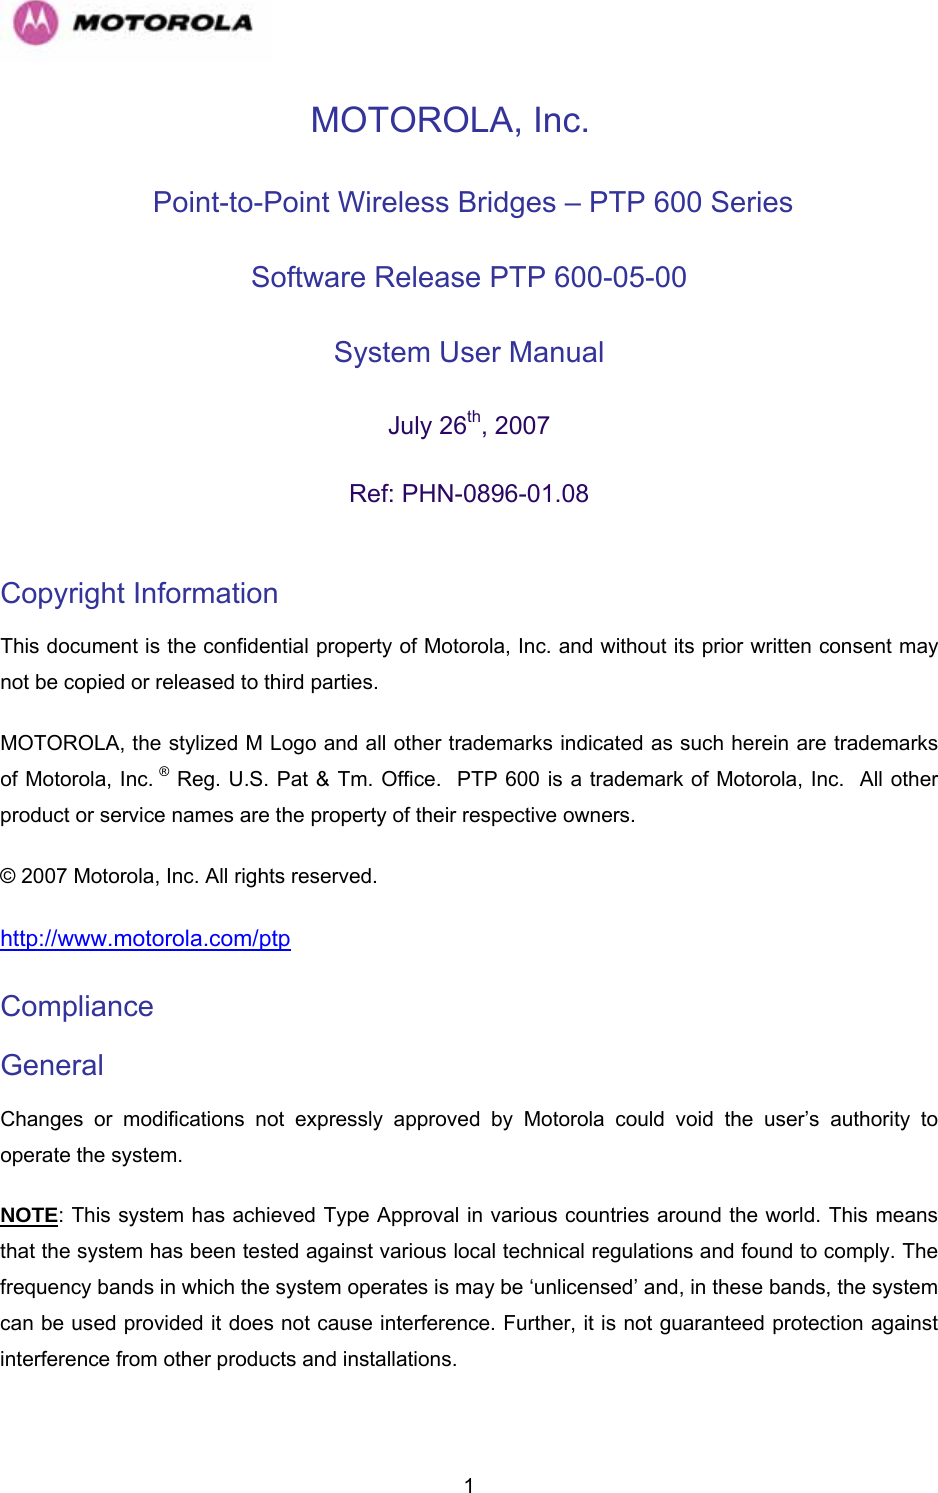   1MOTOROLA, Inc.  Point-to-Point Wireless Bridges – PTP 600 Series Software Release PTP 600-05-00  System User Manual  July 26th, 2007 Ref: PHN-0896-01.08  Copyright Information  This document is the confidential property of Motorola, Inc. and without its prior written consent may not be copied or released to third parties.  MOTOROLA, the stylized M Logo and all other trademarks indicated as such herein are trademarks of Motorola, Inc. ® Reg. U.S. Pat &amp; Tm. Office.  PTP 600 is a trademark of Motorola, Inc.  All other product or service names are the property of their respective owners. © 2007 Motorola, Inc. All rights reserved. http://www.motorola.com/ptp Compliance  General Changes or modifications not expressly approved by Motorola could void the user’s authority to operate the system.  NOTE: This system has achieved Type Approval in various countries around the world. This means that the system has been tested against various local technical regulations and found to comply. The frequency bands in which the system operates is may be ‘unlicensed’ and, in these bands, the system can be used provided it does not cause interference. Further, it is not guaranteed protection against interference from other products and installations. 